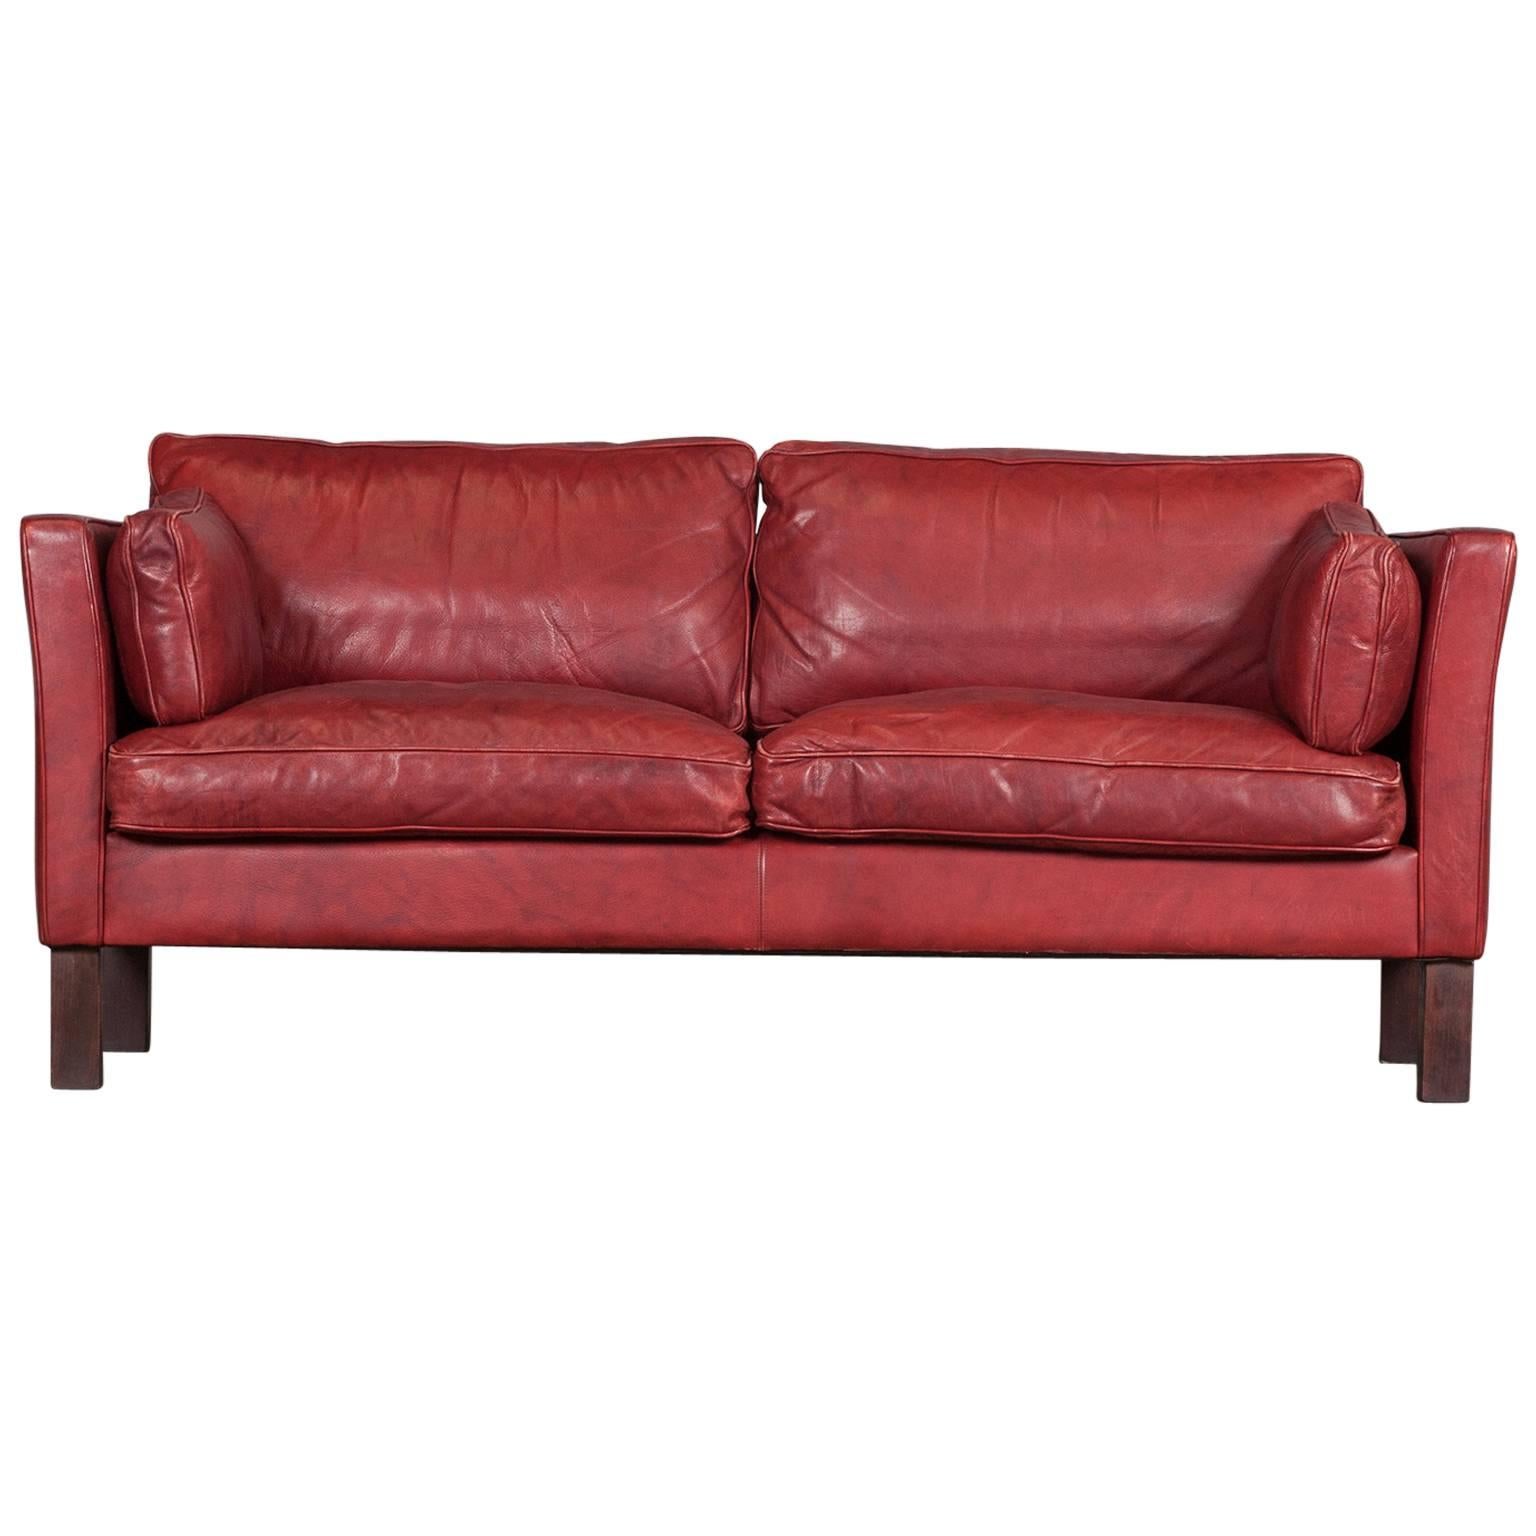 Danish Two-Seater Sofa in Cherry Red Leather by Arne Norell, 1960s